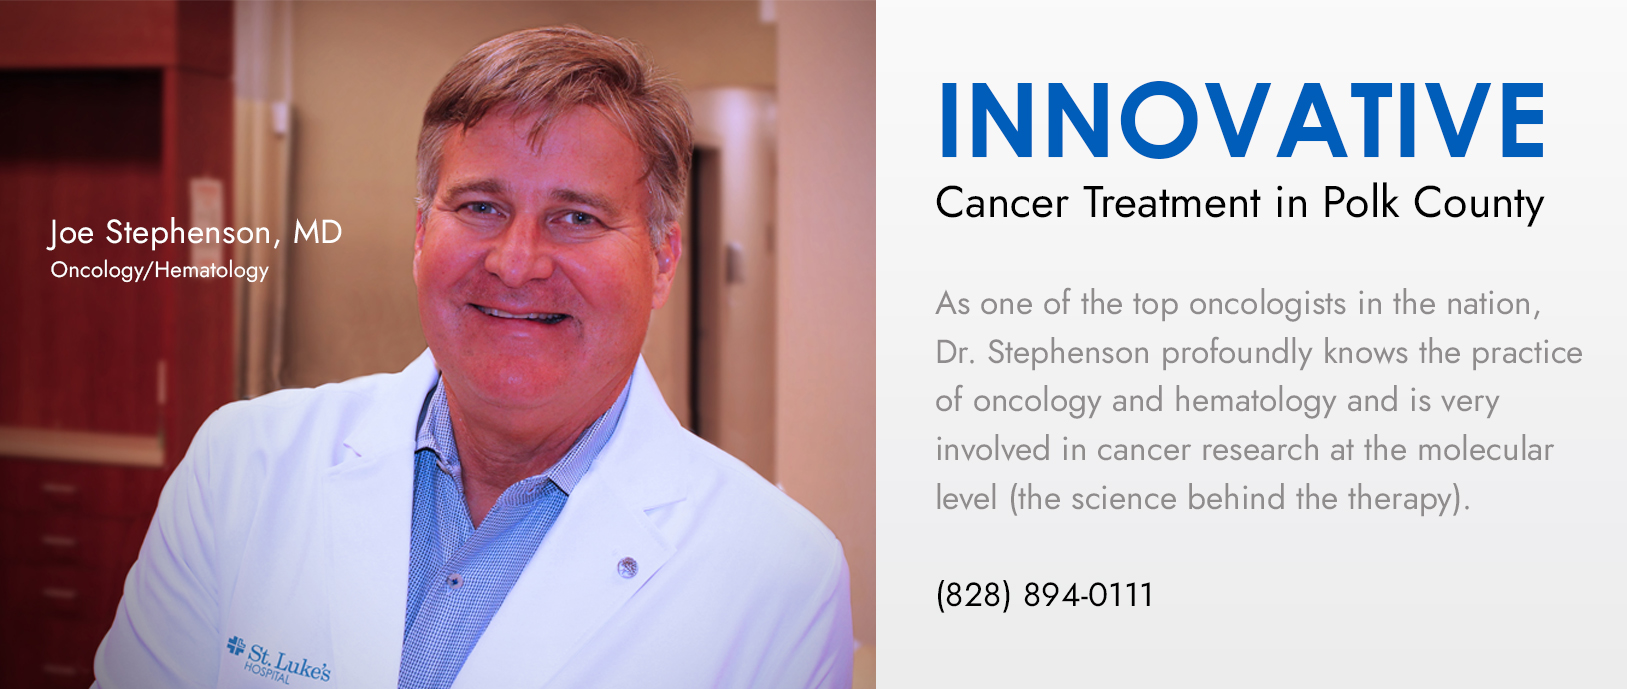 Banner picture of Dr. Joe Stephenson
Banner says:
Bringing world-class ONCOLOGY to rural Polk County.
Mediical Oncology and Hematology 
Immunotherapy and Chemotherapy 
Multidisciplinary approach and cancer prevention

(828)894-0111

St. Lukes 
CANCER & INFUSION